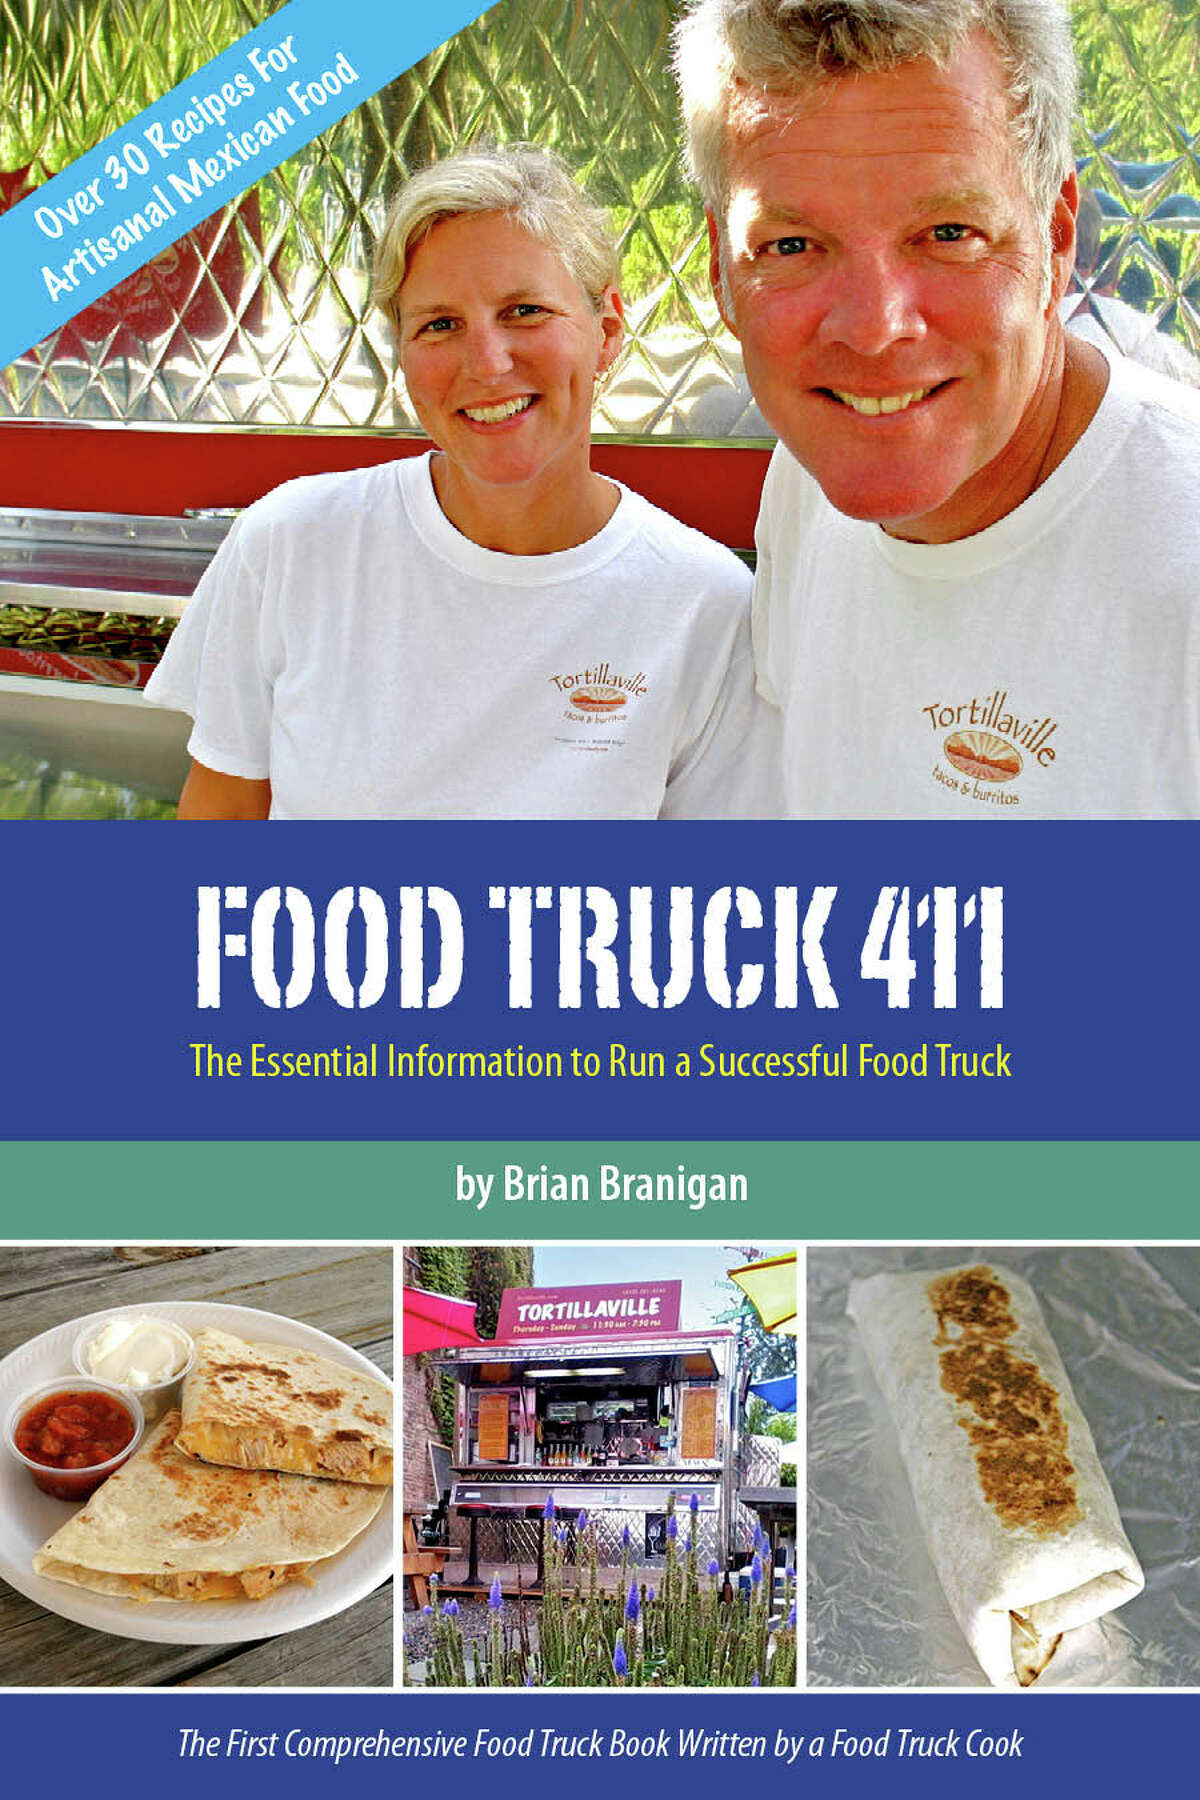 A Hudson couple wrote "Food Truck 411," a cookbook/how-to guide, after opening Tortillaville five years ago. (Brian Branigan)